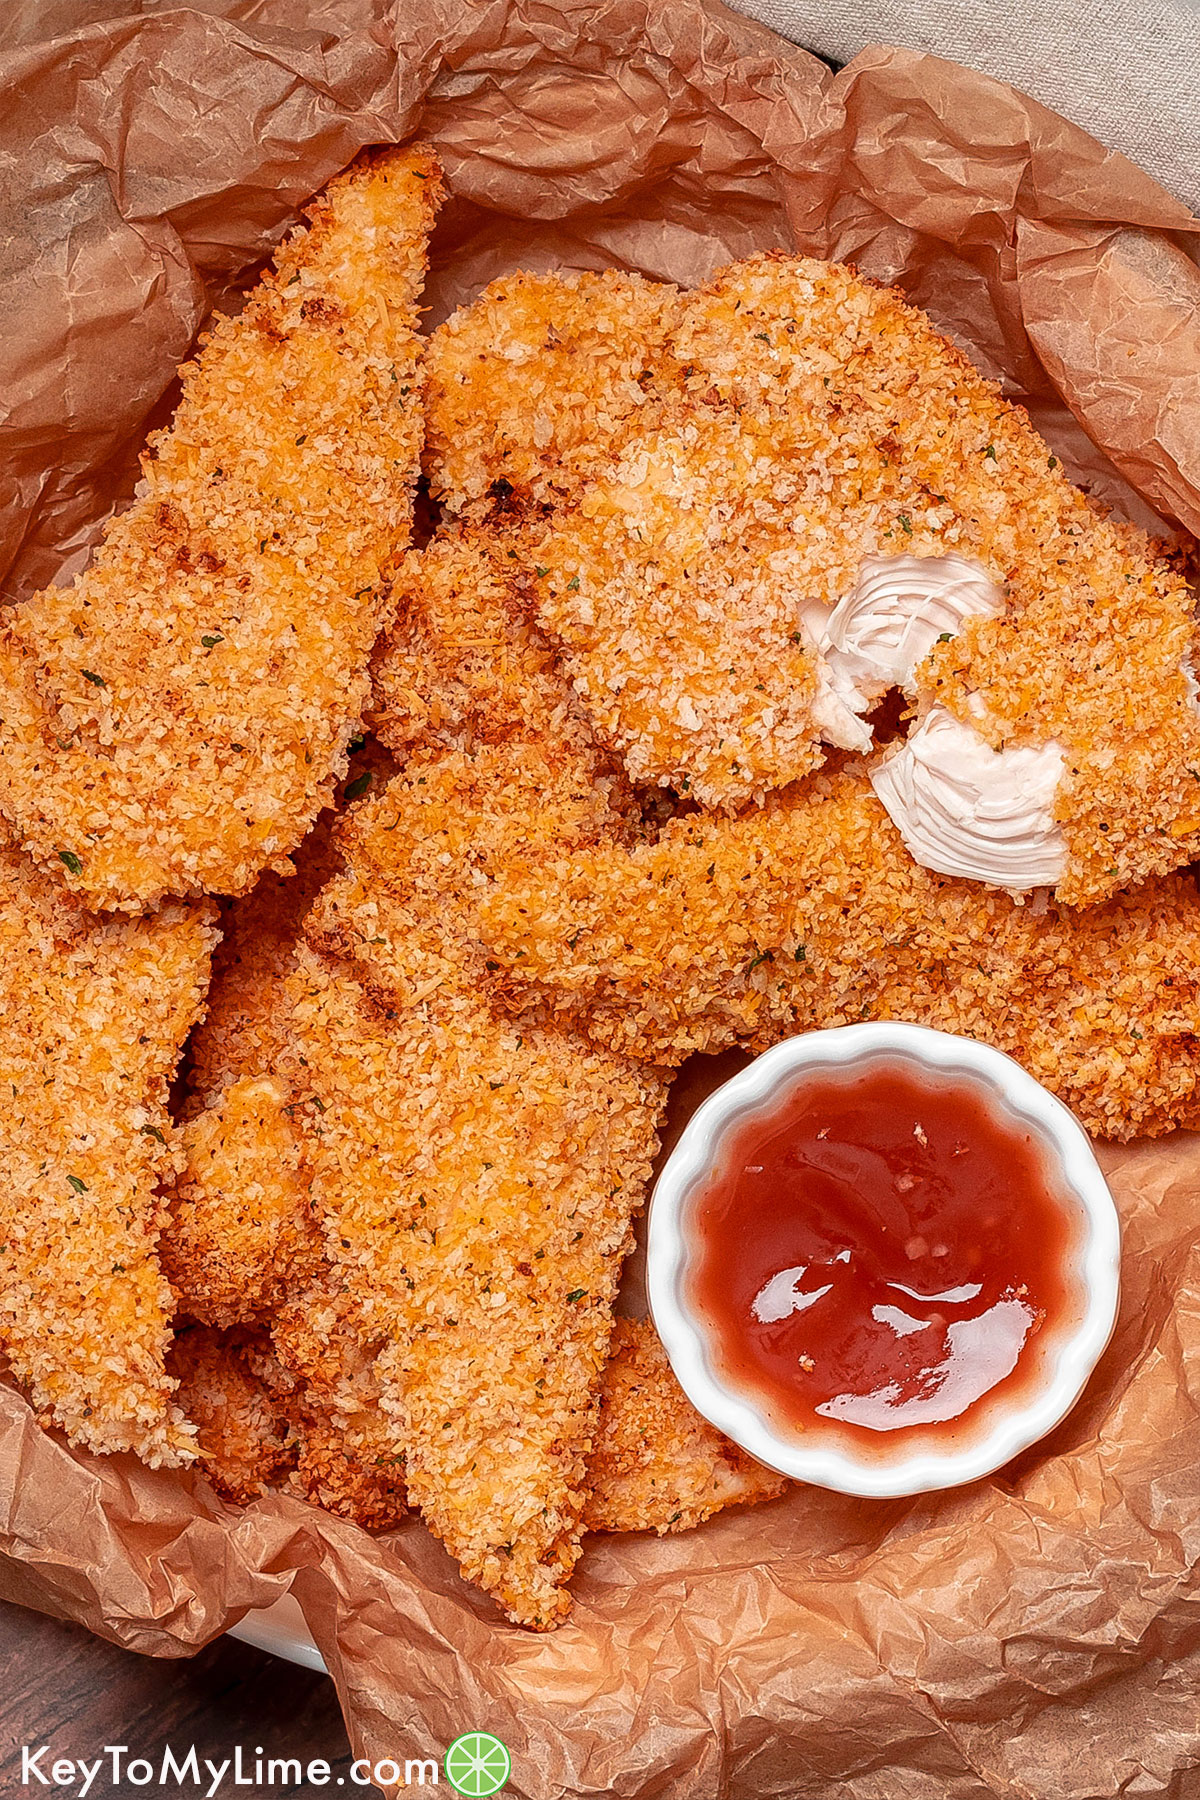 A pile of panko chicken tenders with a split tender on top showing the juicy inside texture.